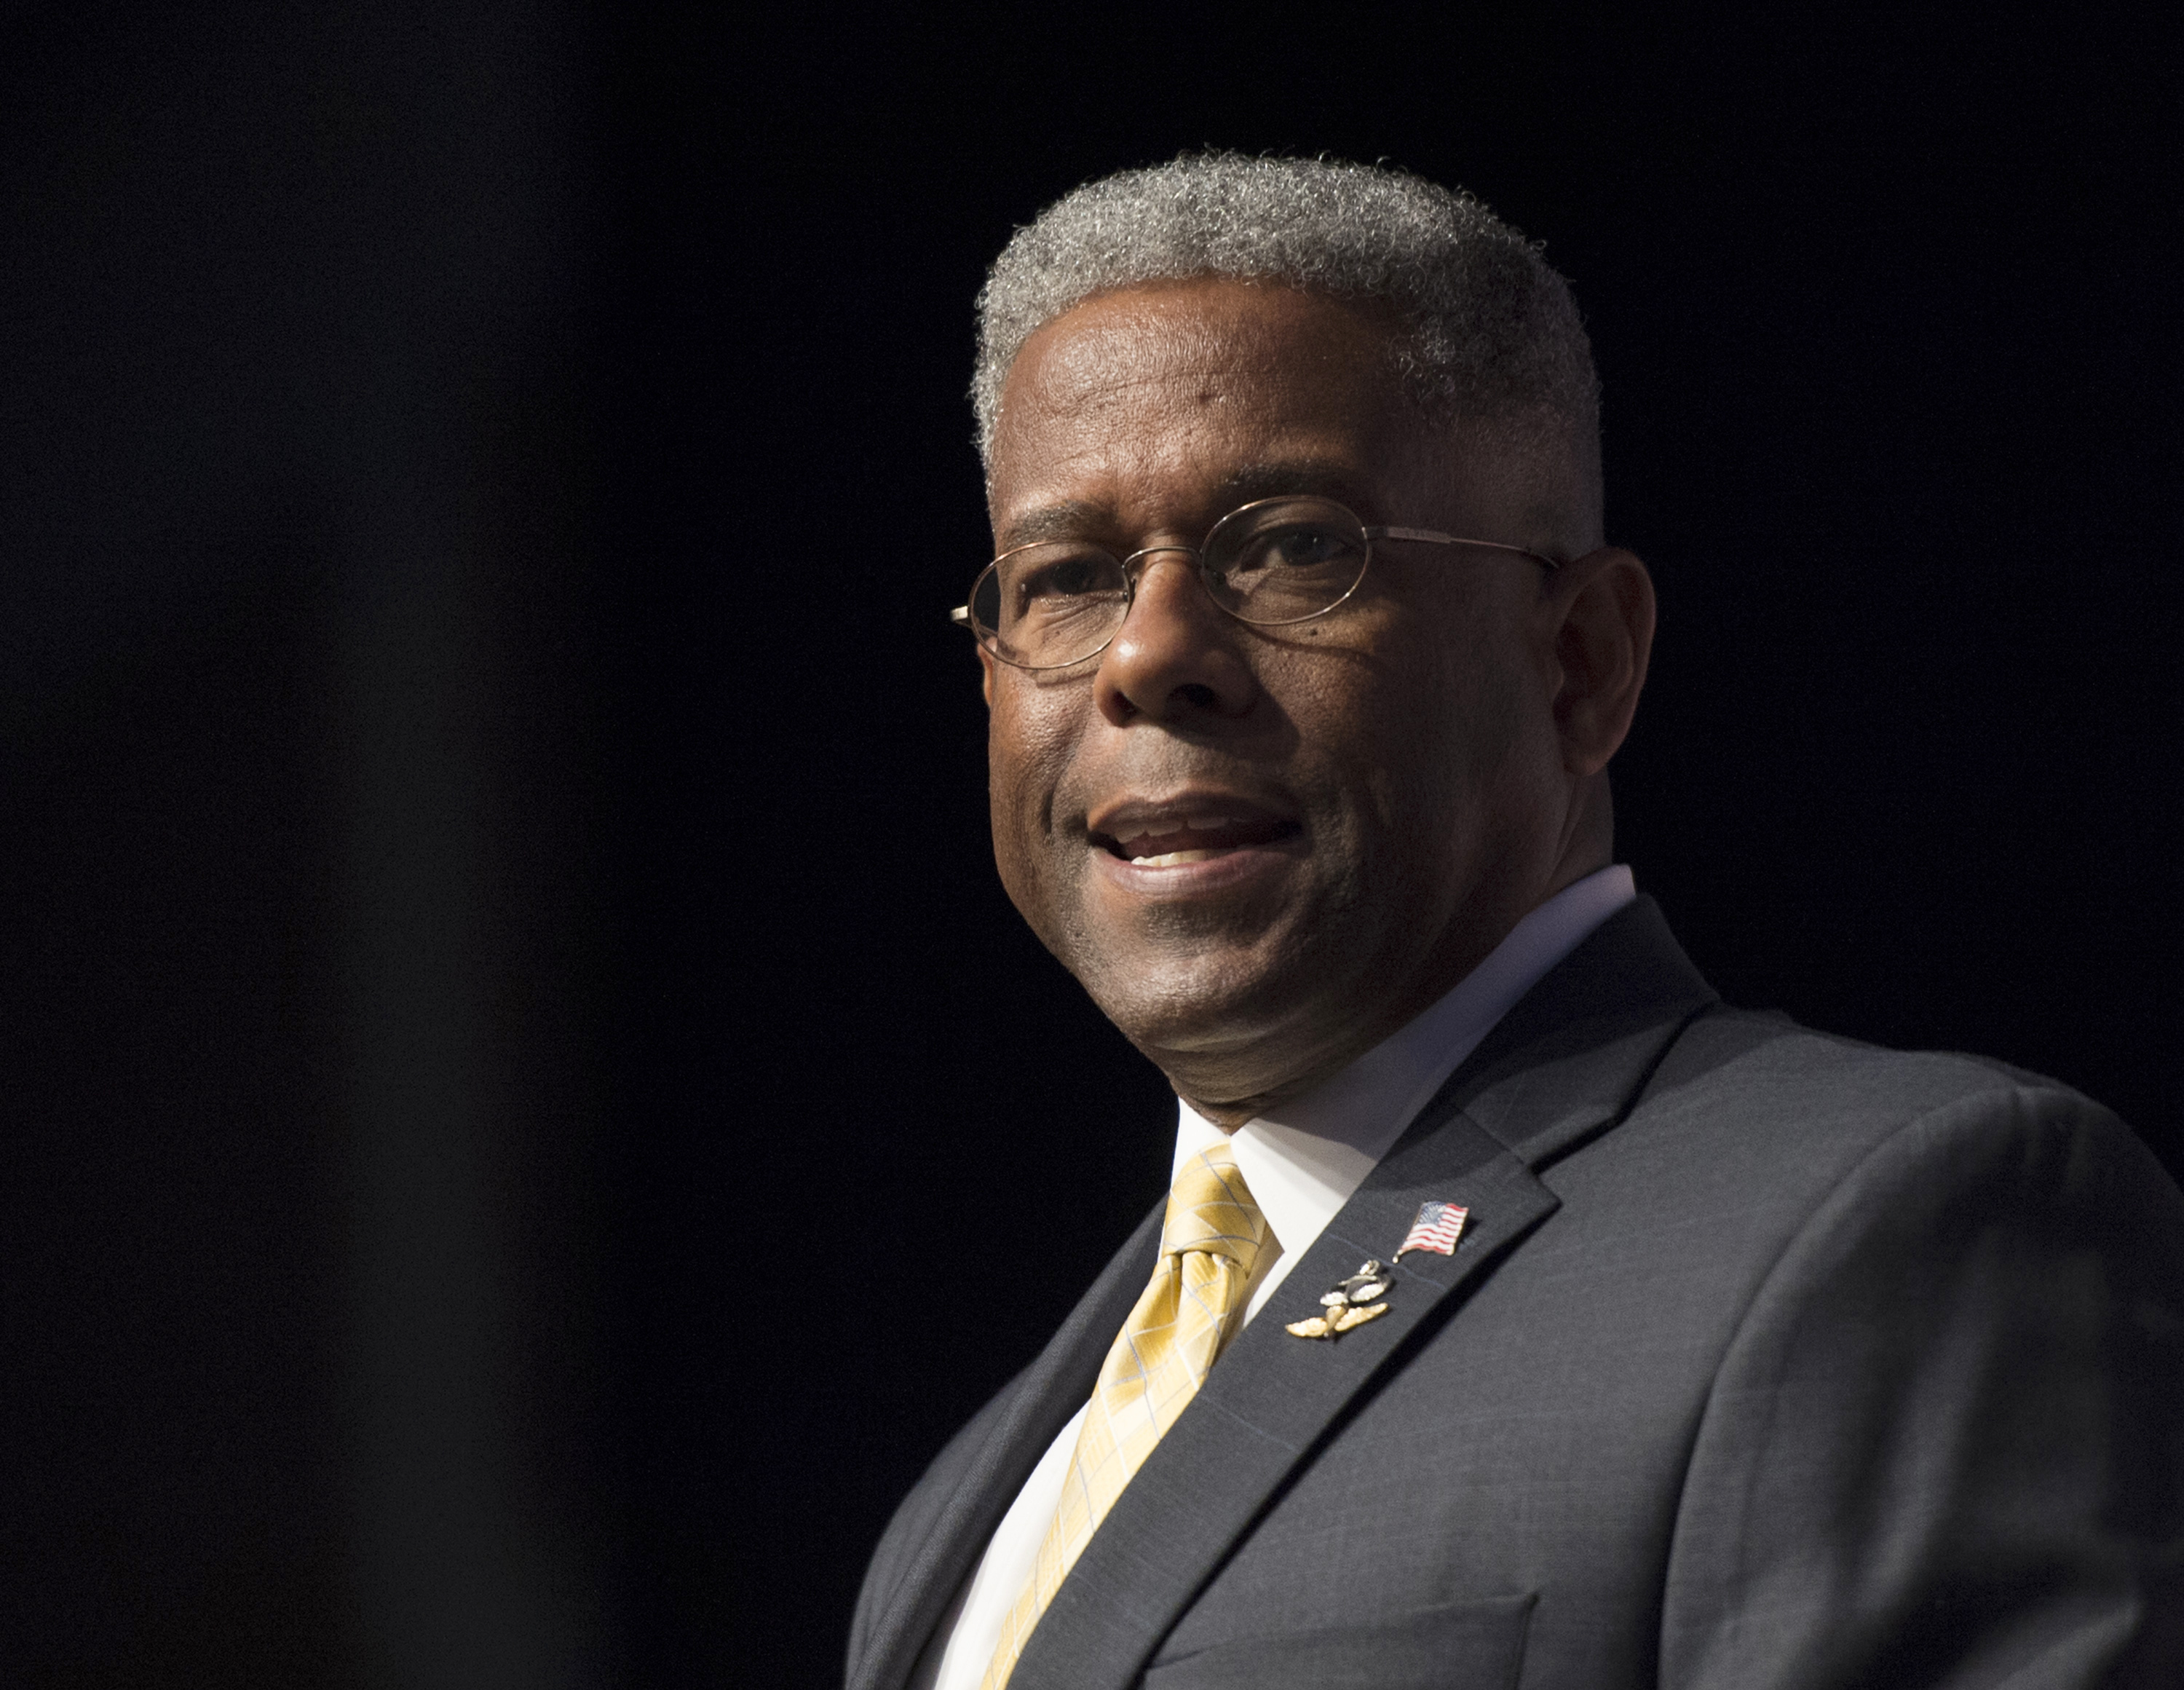 Beyond livid Wife of Republican Texas gubernatorial candidate Allen West arrested on DWI charge